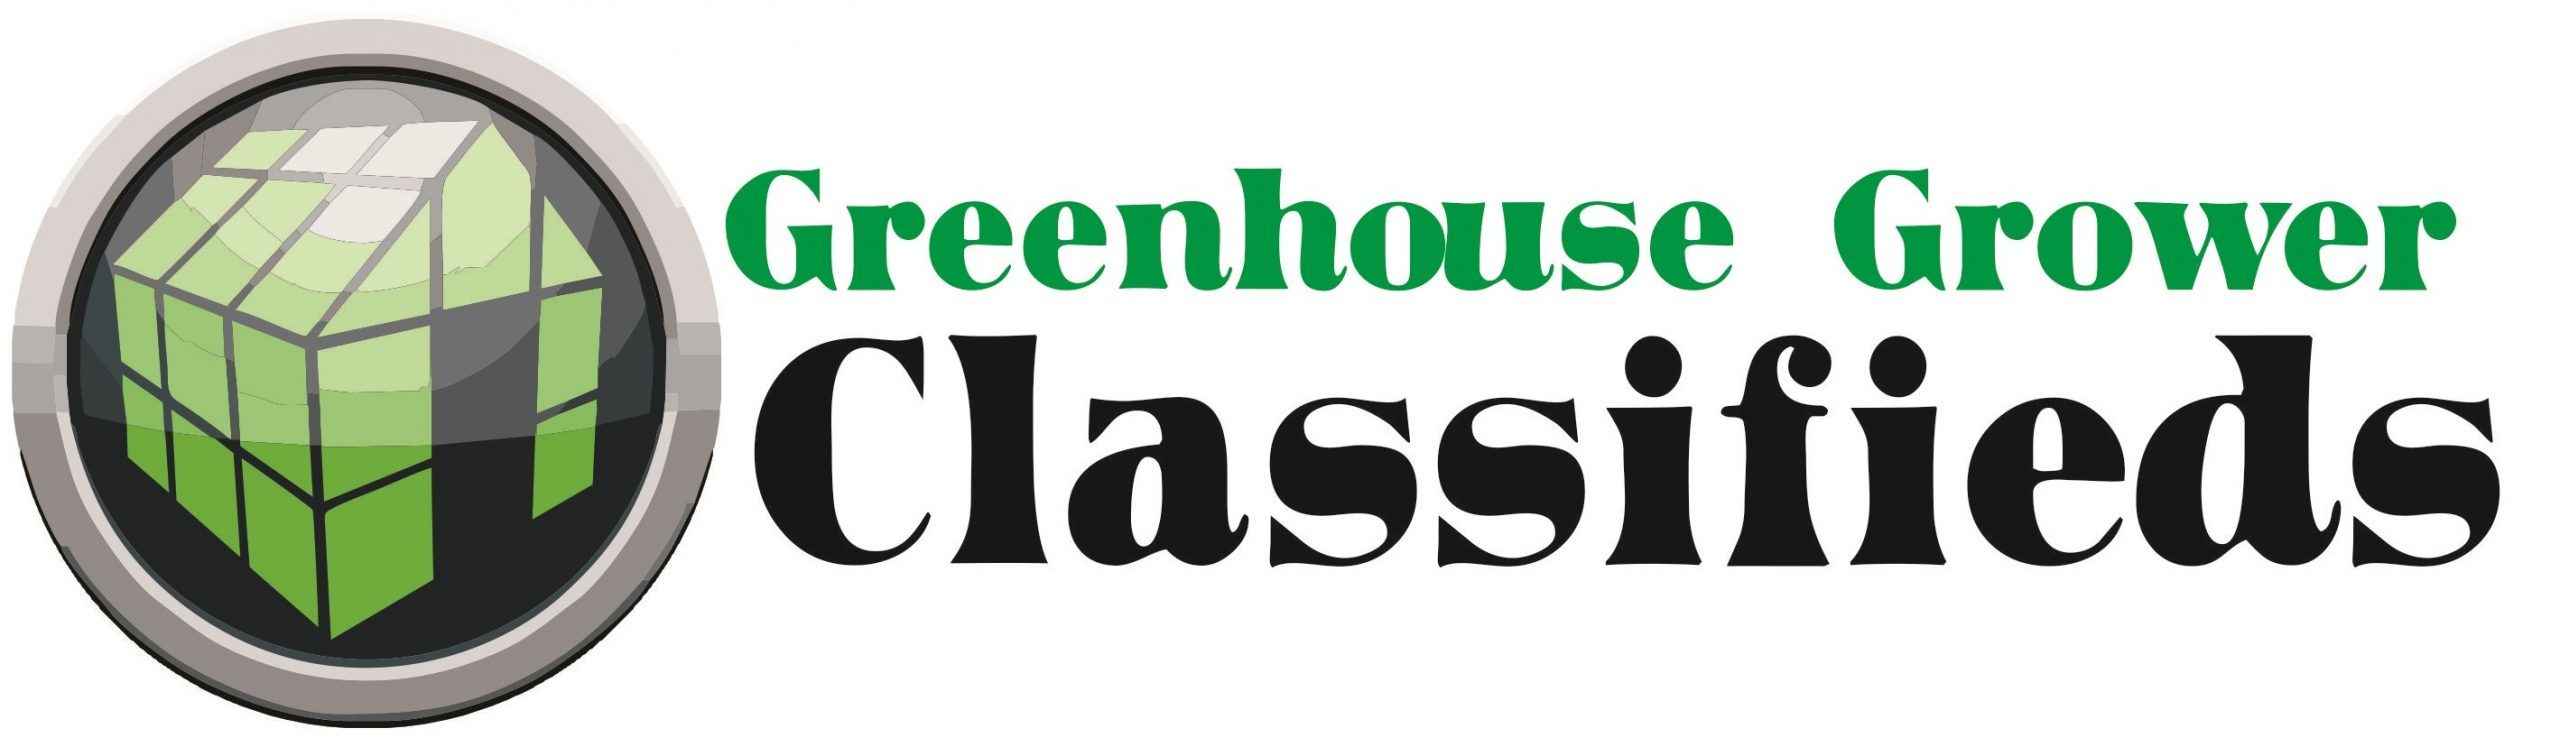 Greenhouse Grower Classifieds